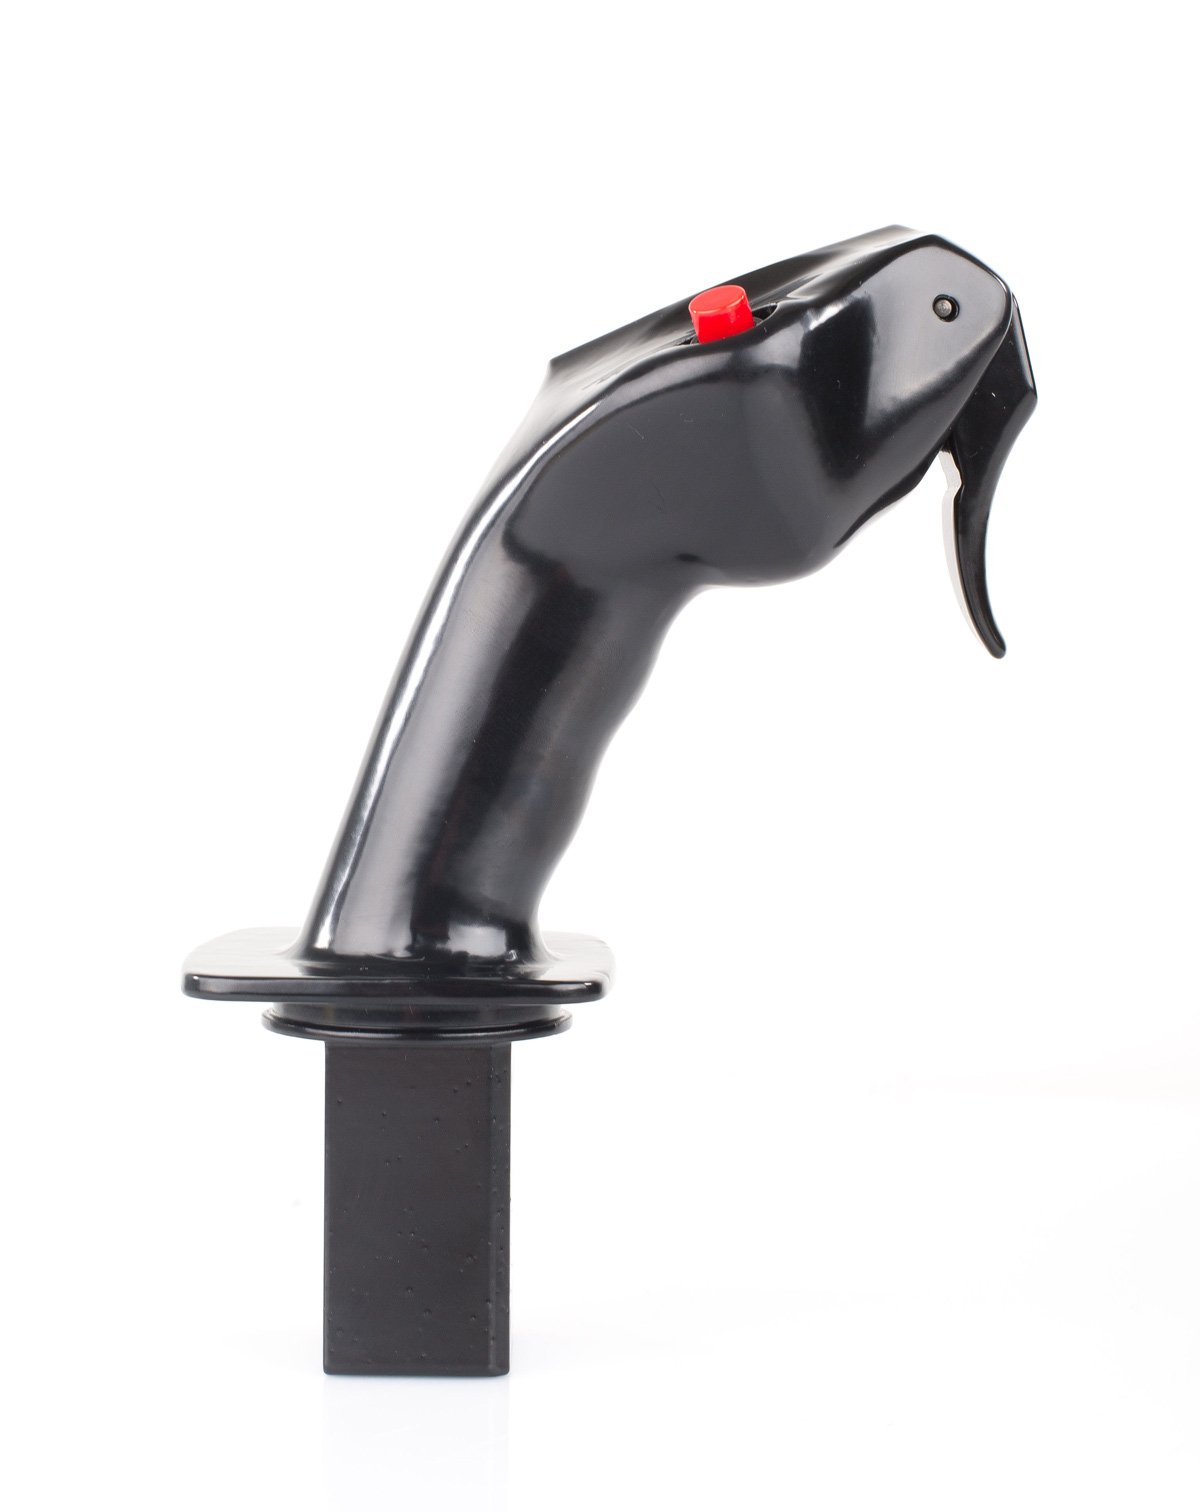 FSC A320 CPT SIDESTICK HANDLE RIGHT